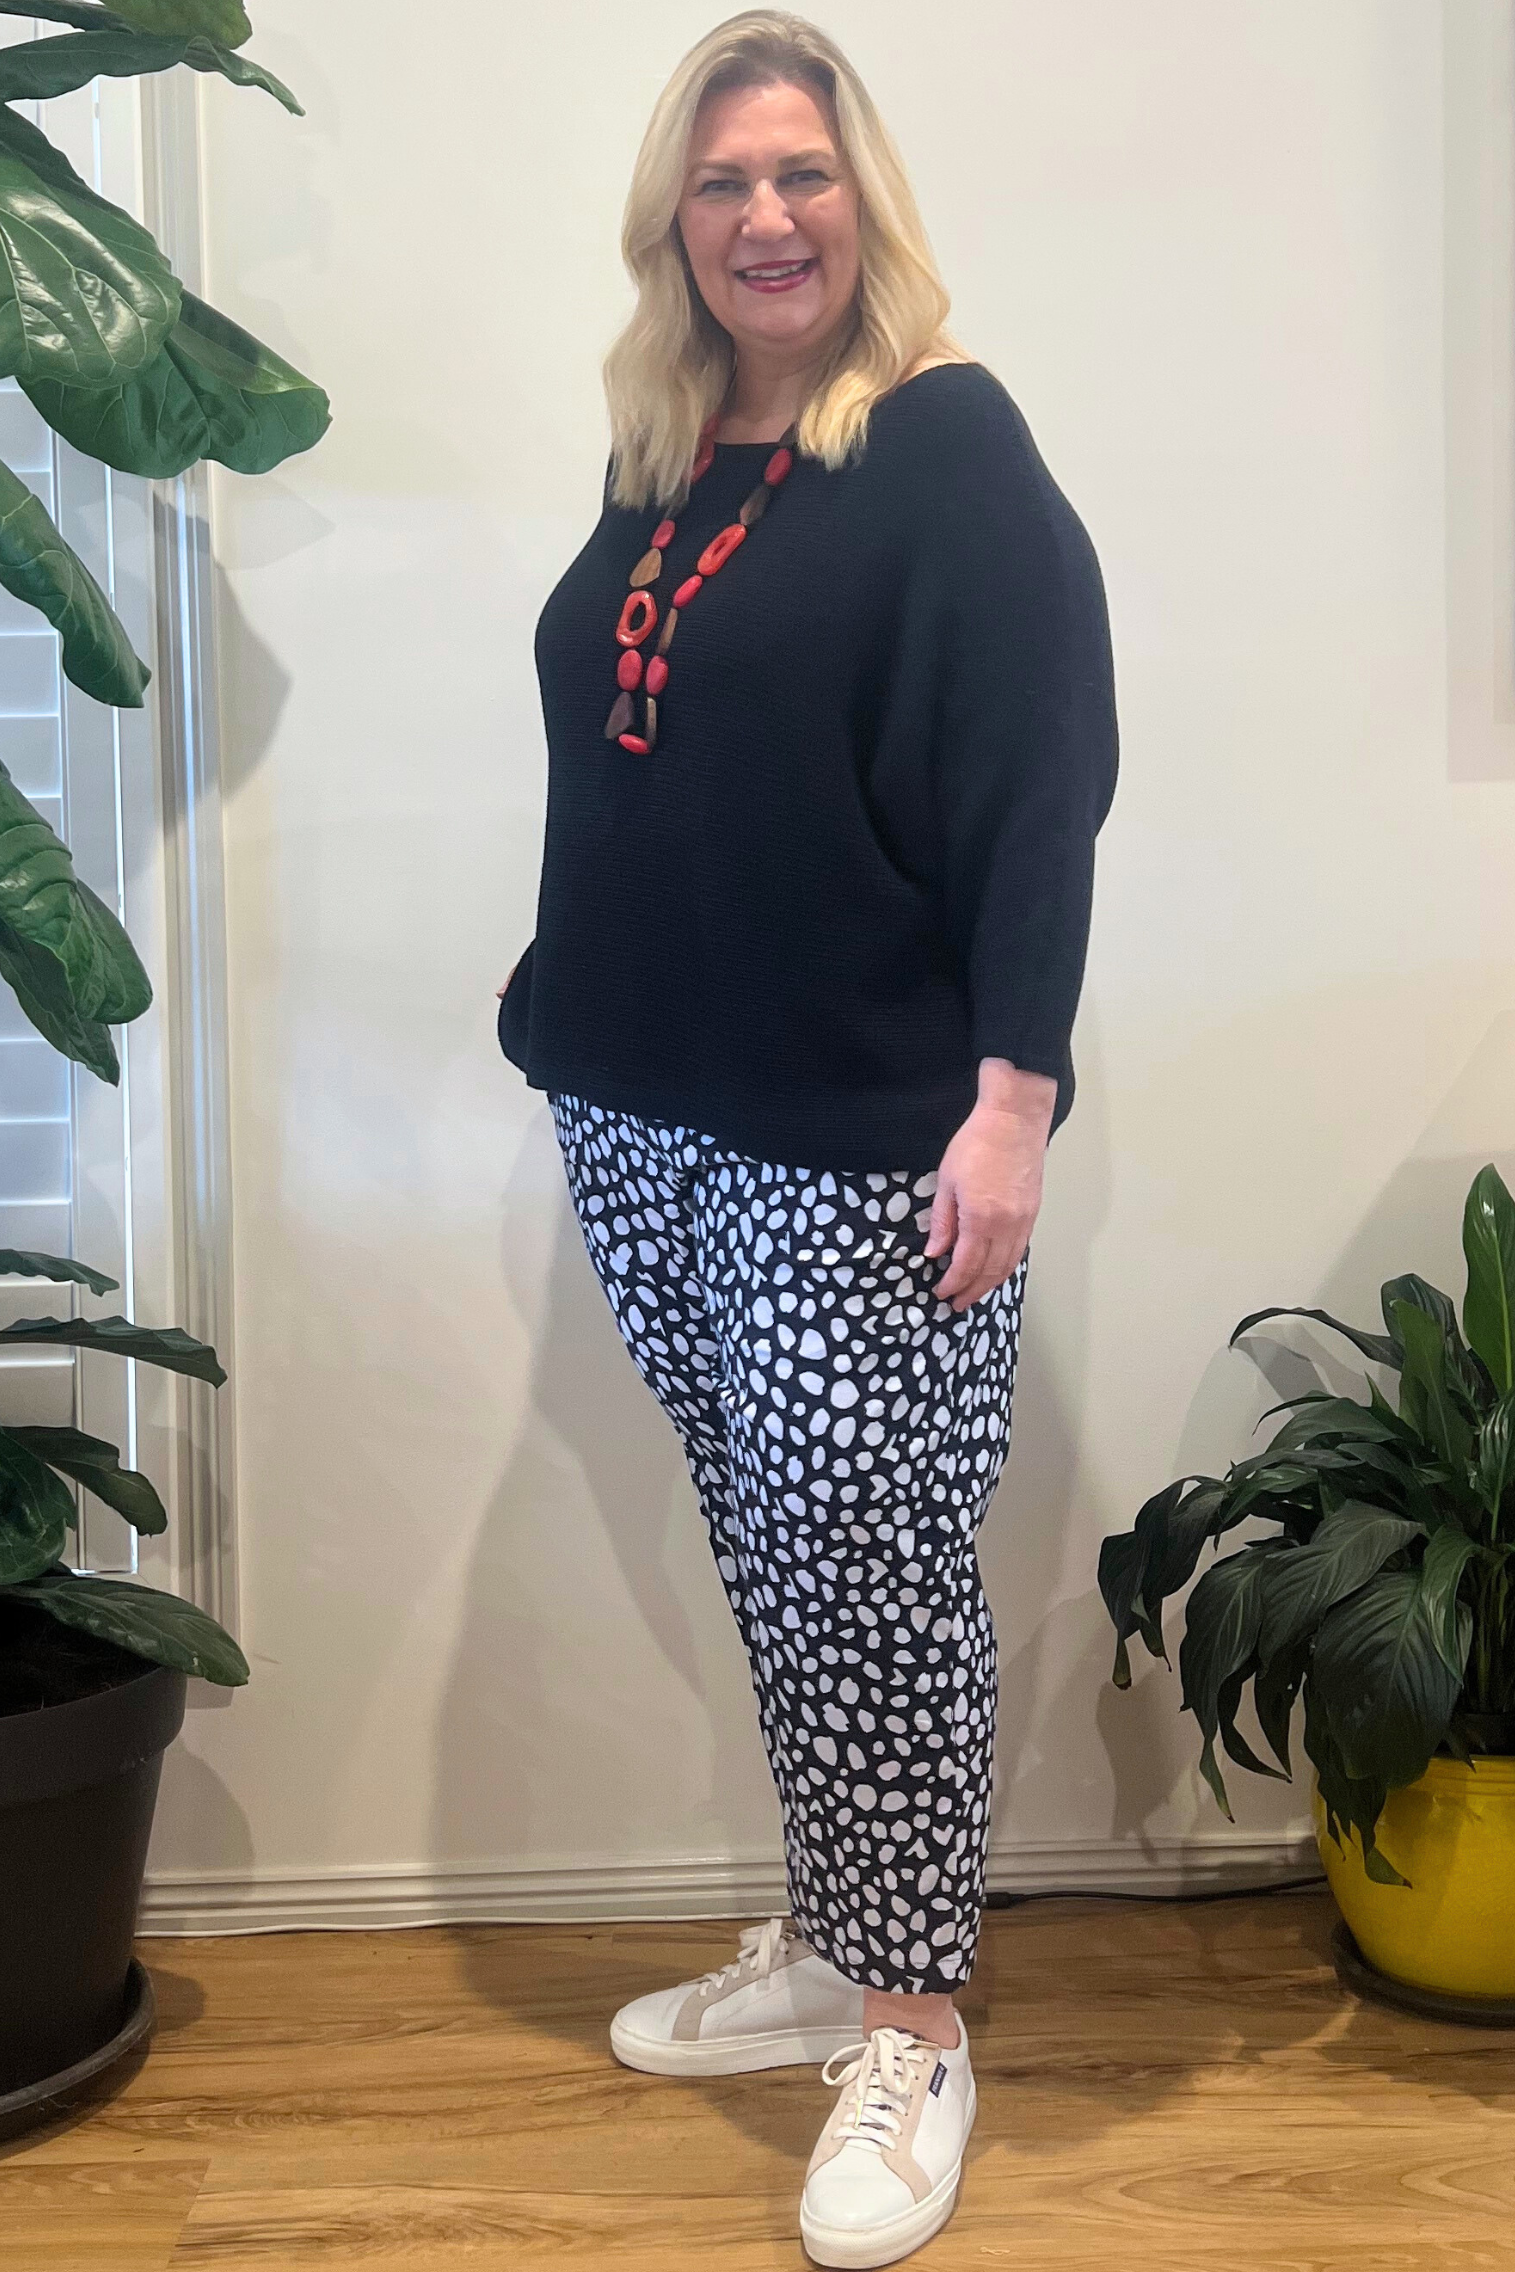 Kita Ku modelling a black and white spotted Pant Port with a black jumper and set indoors. 